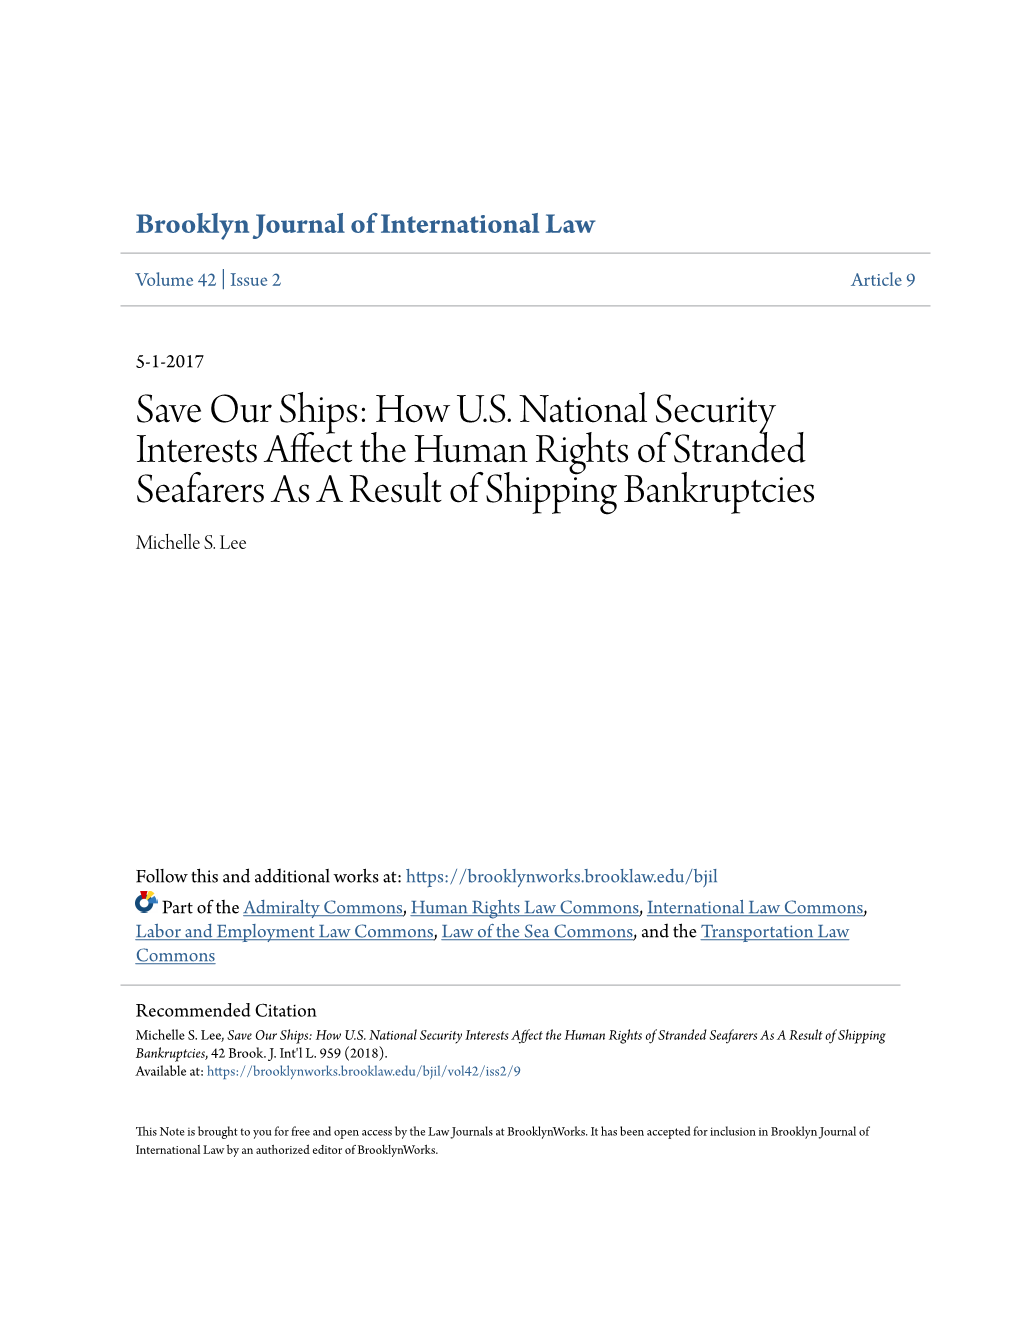 Save Our Ships: How U.S. National Security Interests Affect the Human Rights of Stranded Seafarers As a Result of Shipping Bankruptcies Michelle S